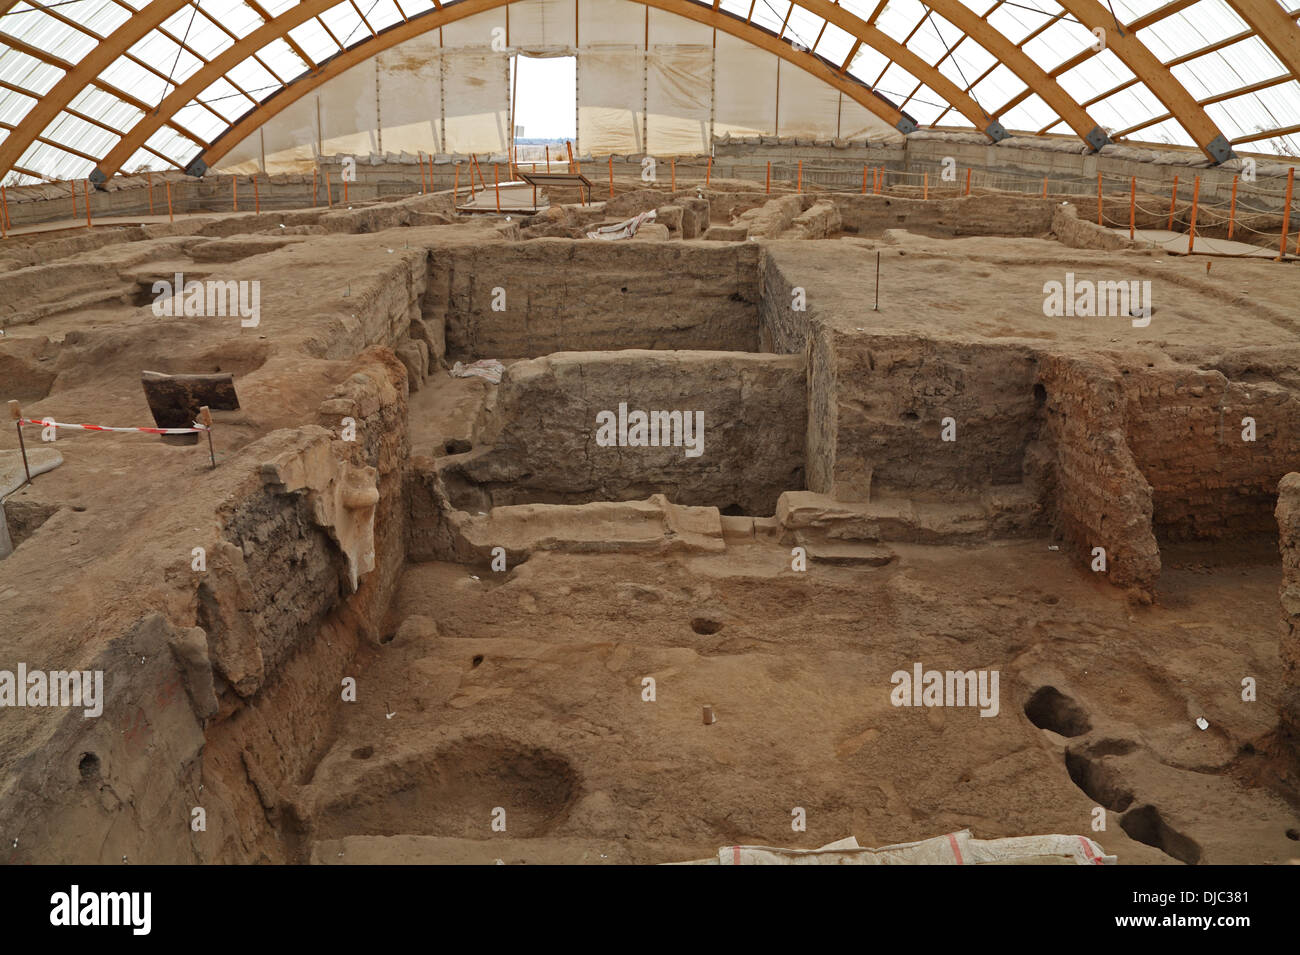 Catalhoyuk early Neoloithic site with rooms dating from 9,500 years, Cumra, Konya, central Turkey Stock Photo